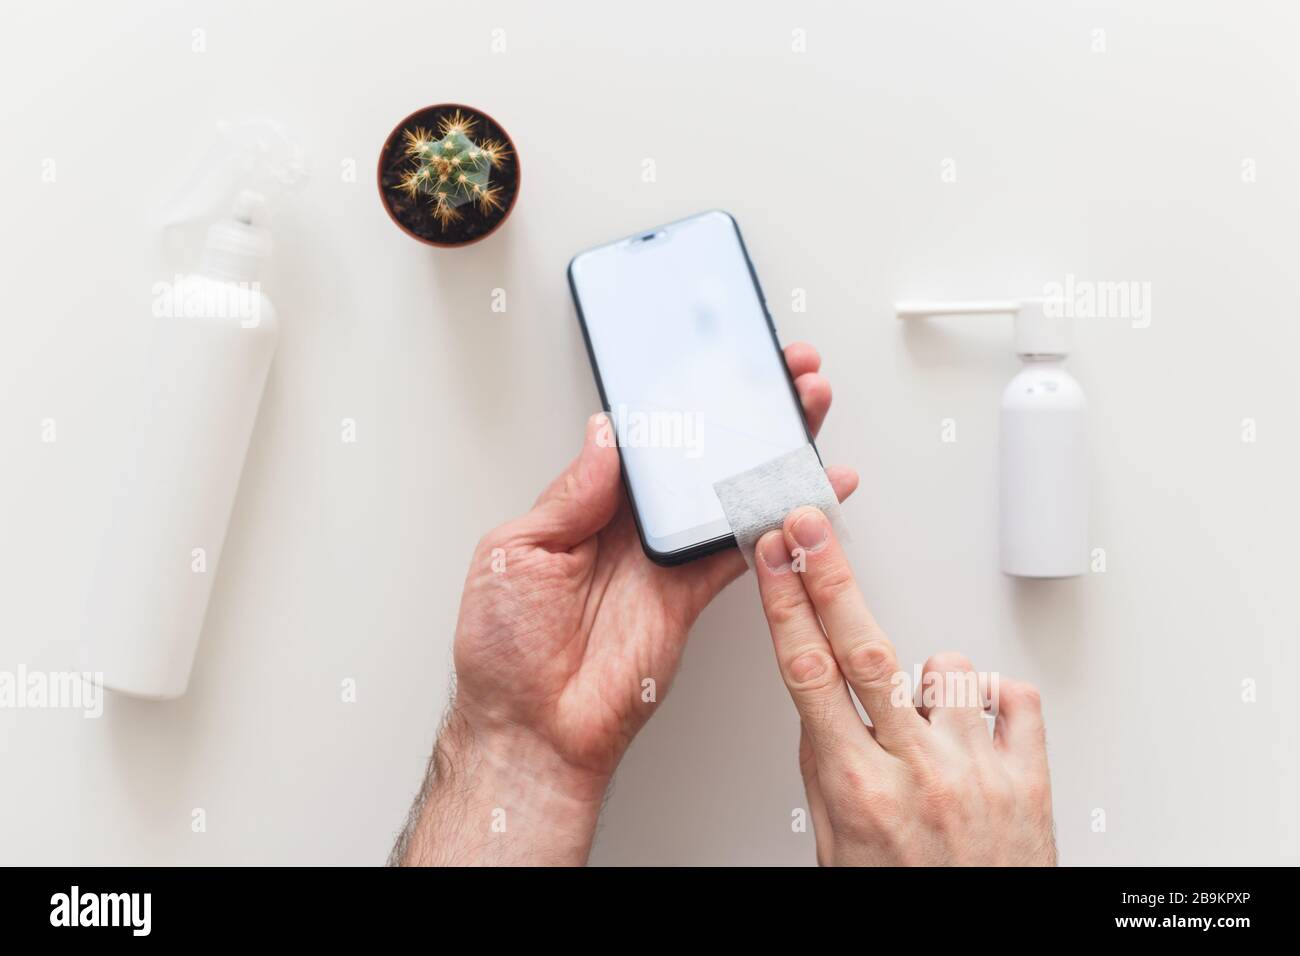 Man disinfects smartphone wiping by antibacterial wipe to prevent yourself from coronavirus COVID-19. Flat lay, on white. Stock Photo